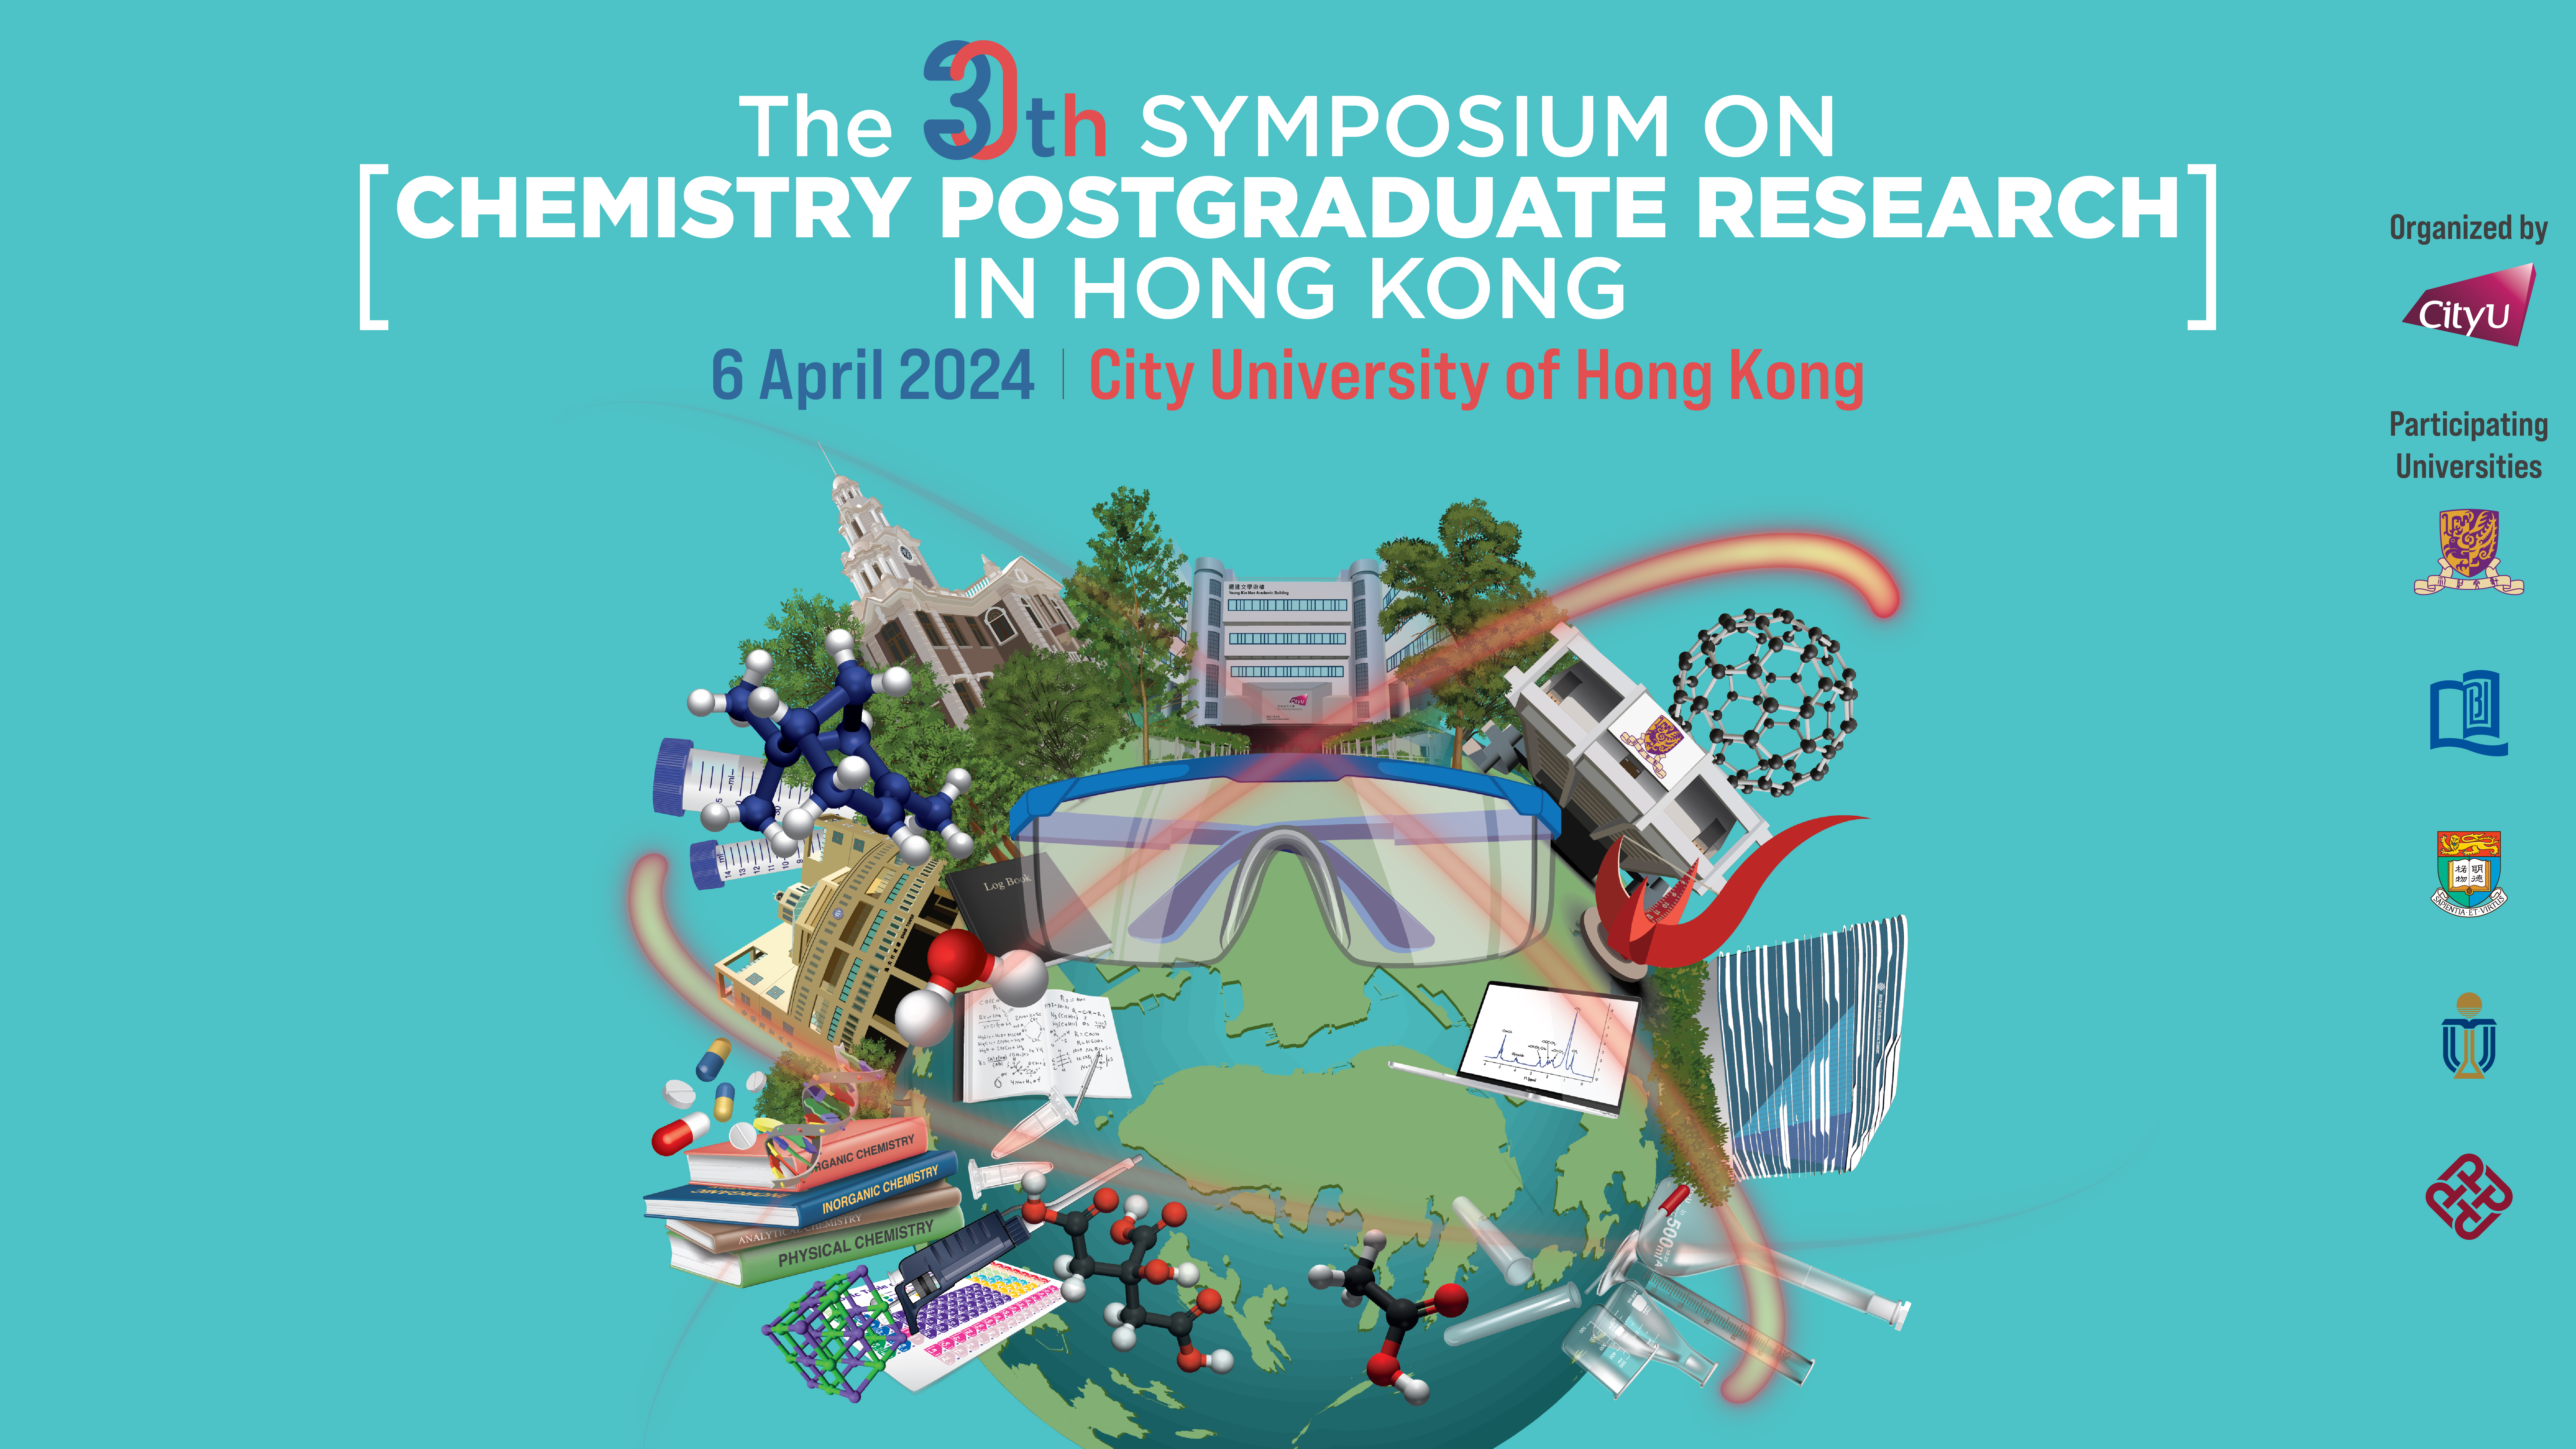 the 30th Symposium on Chemistry Postgraduate Research in Hong Kong